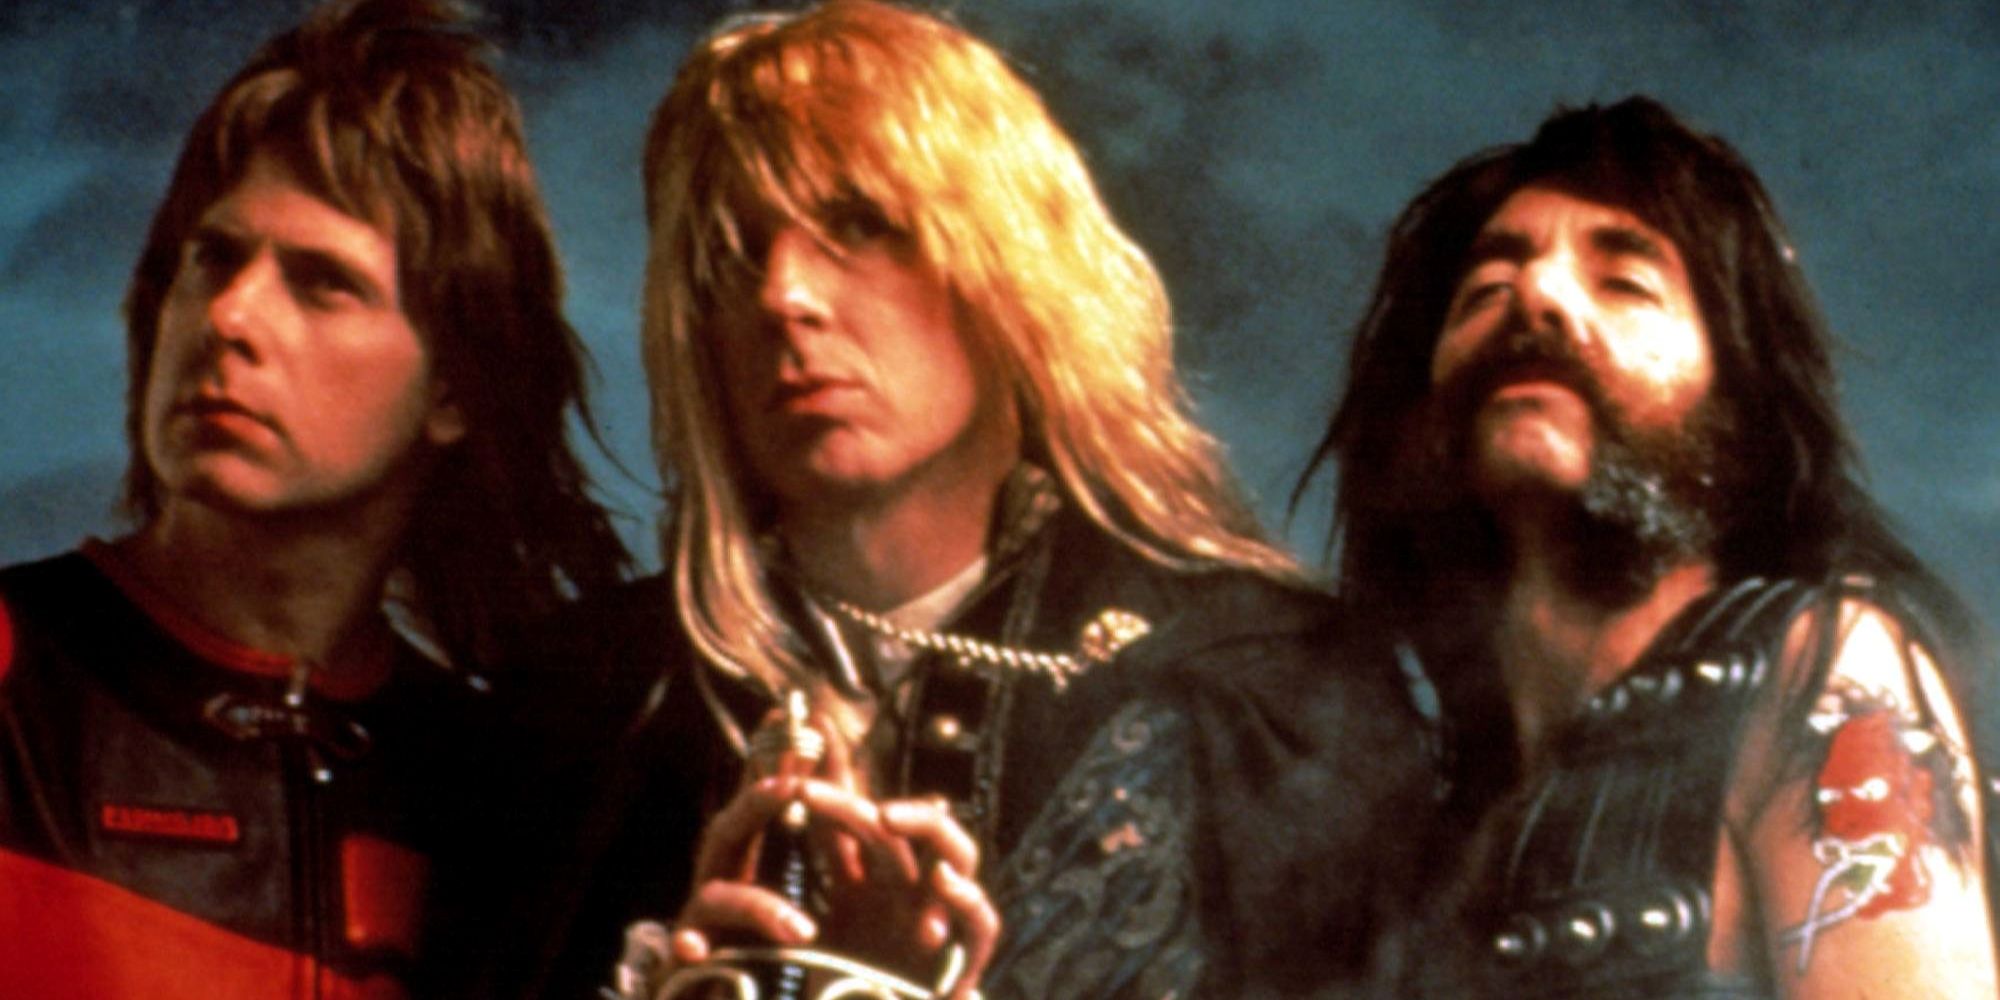 The lead bandmates in 'This Is Spinal Tap'